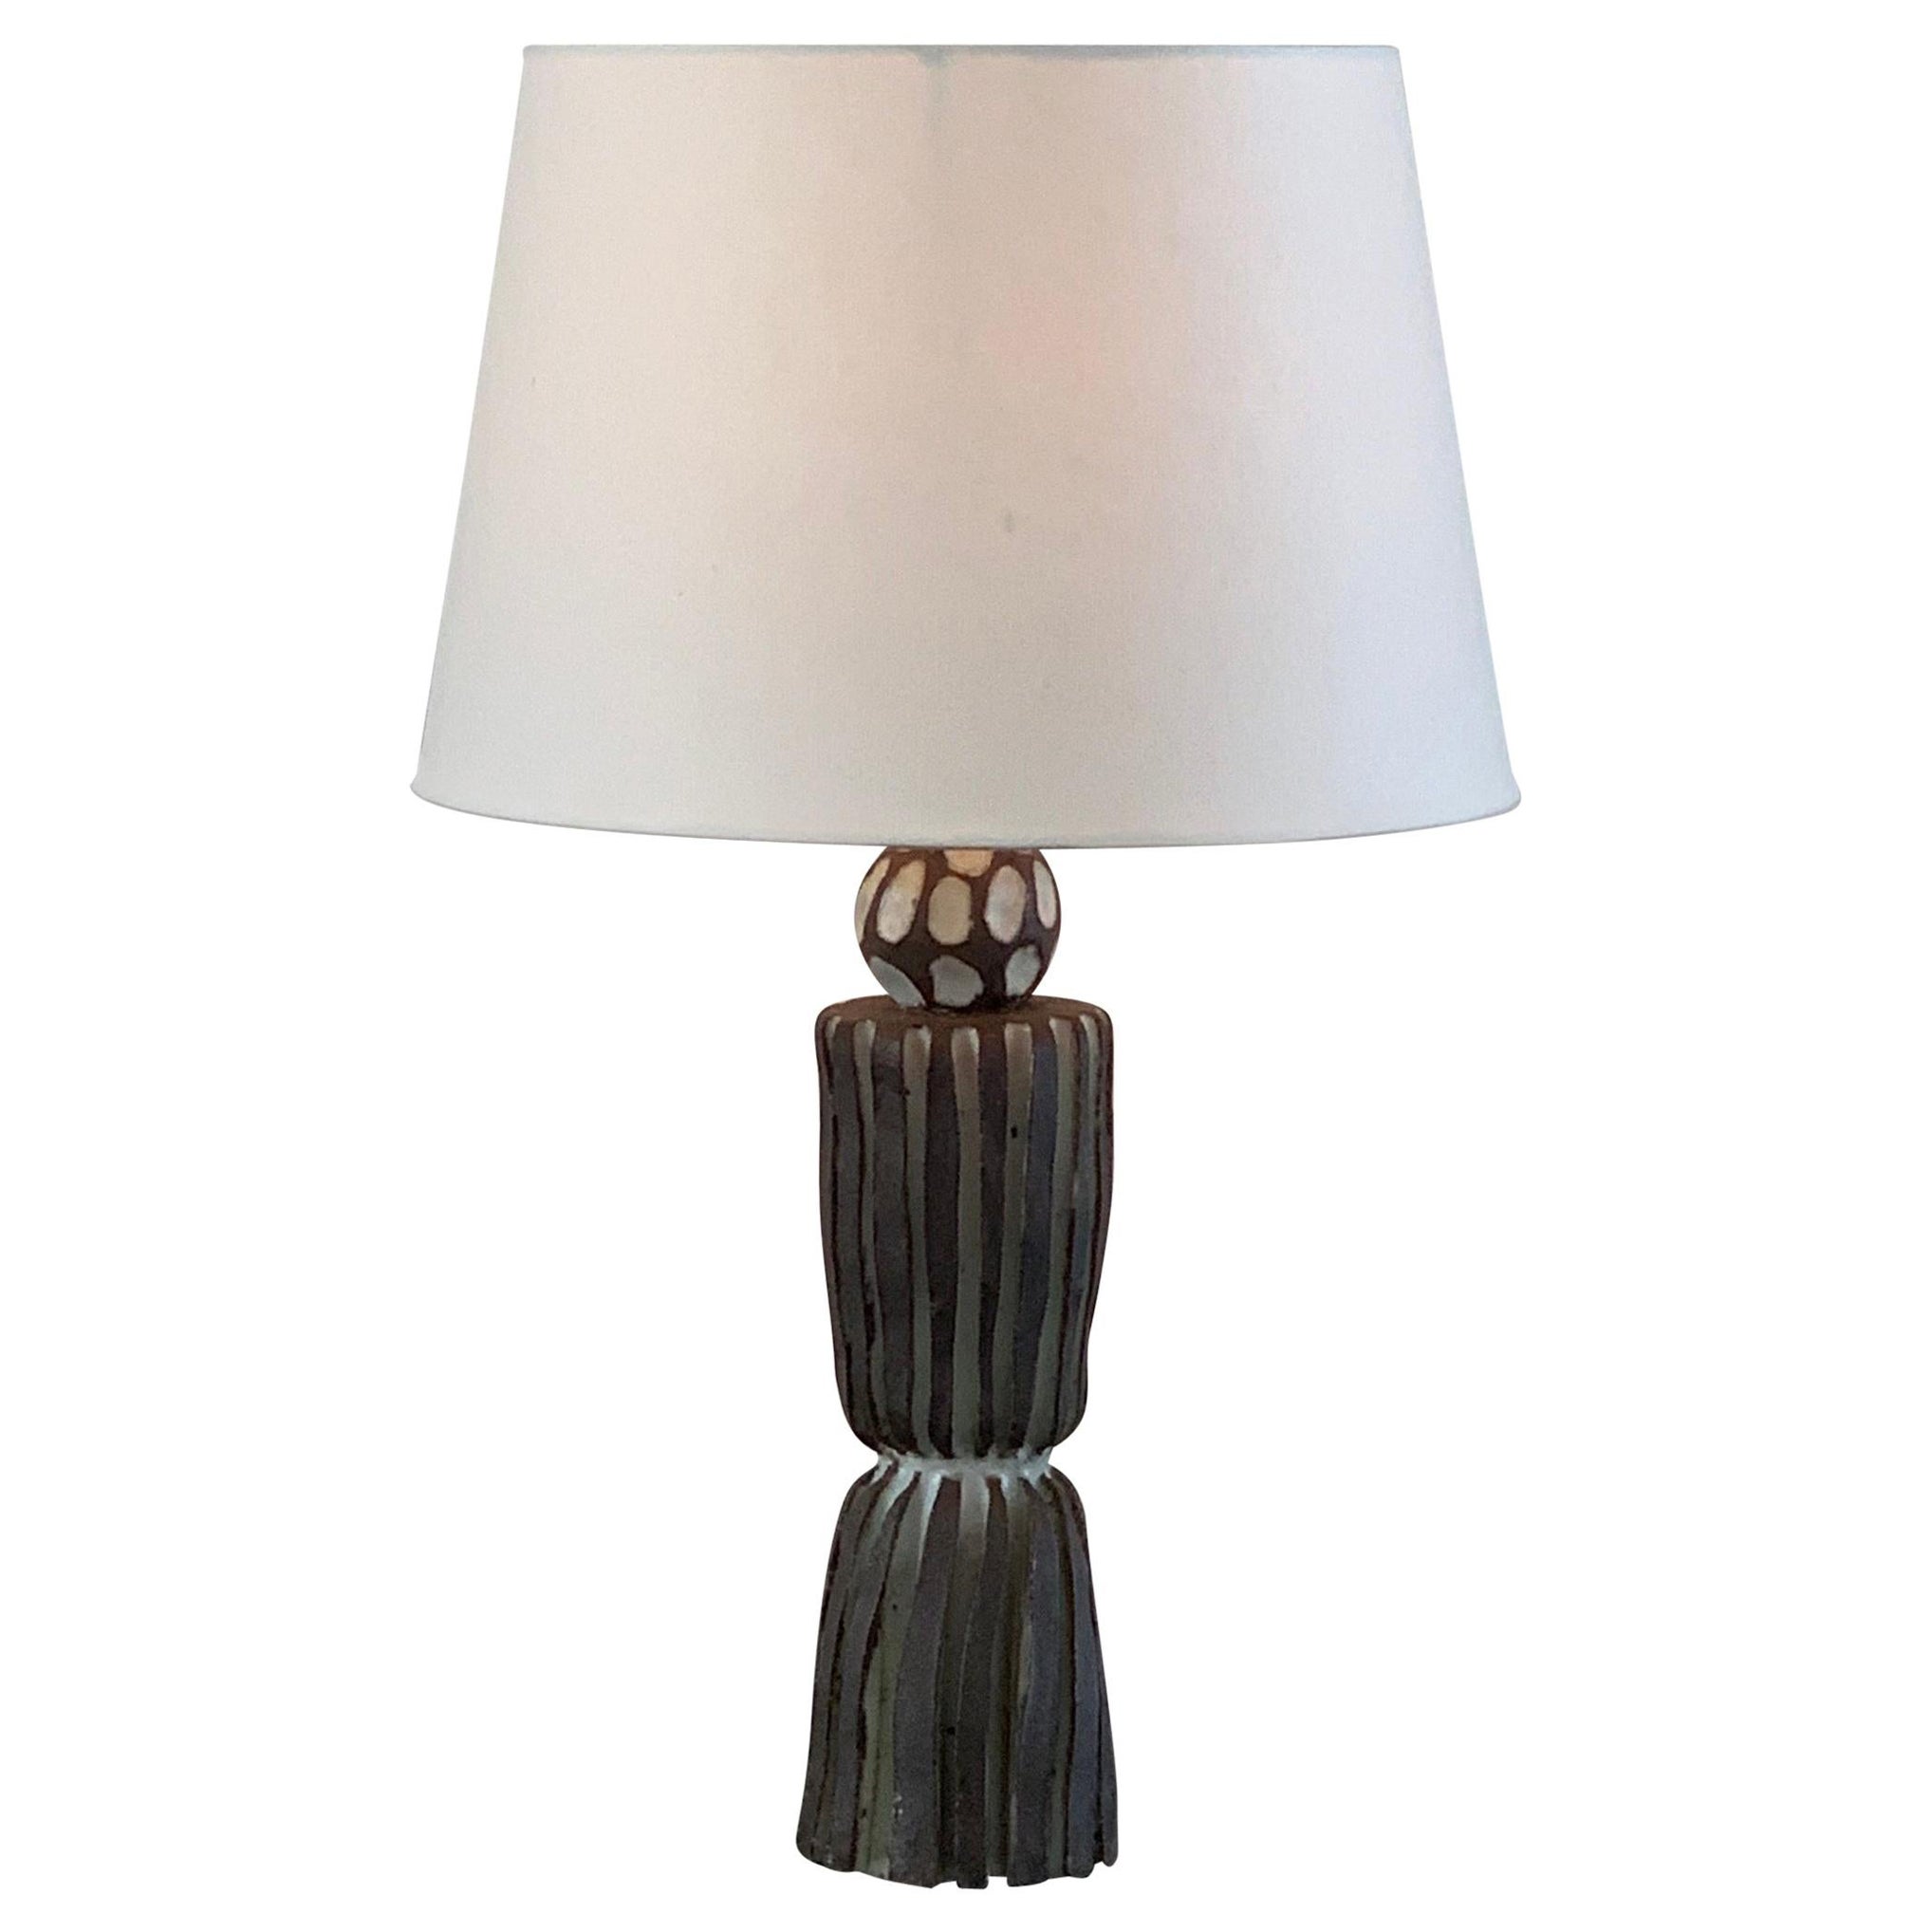 Grooved 'Sillons' Pottery Lamp with Parchment Shade by Design Frères